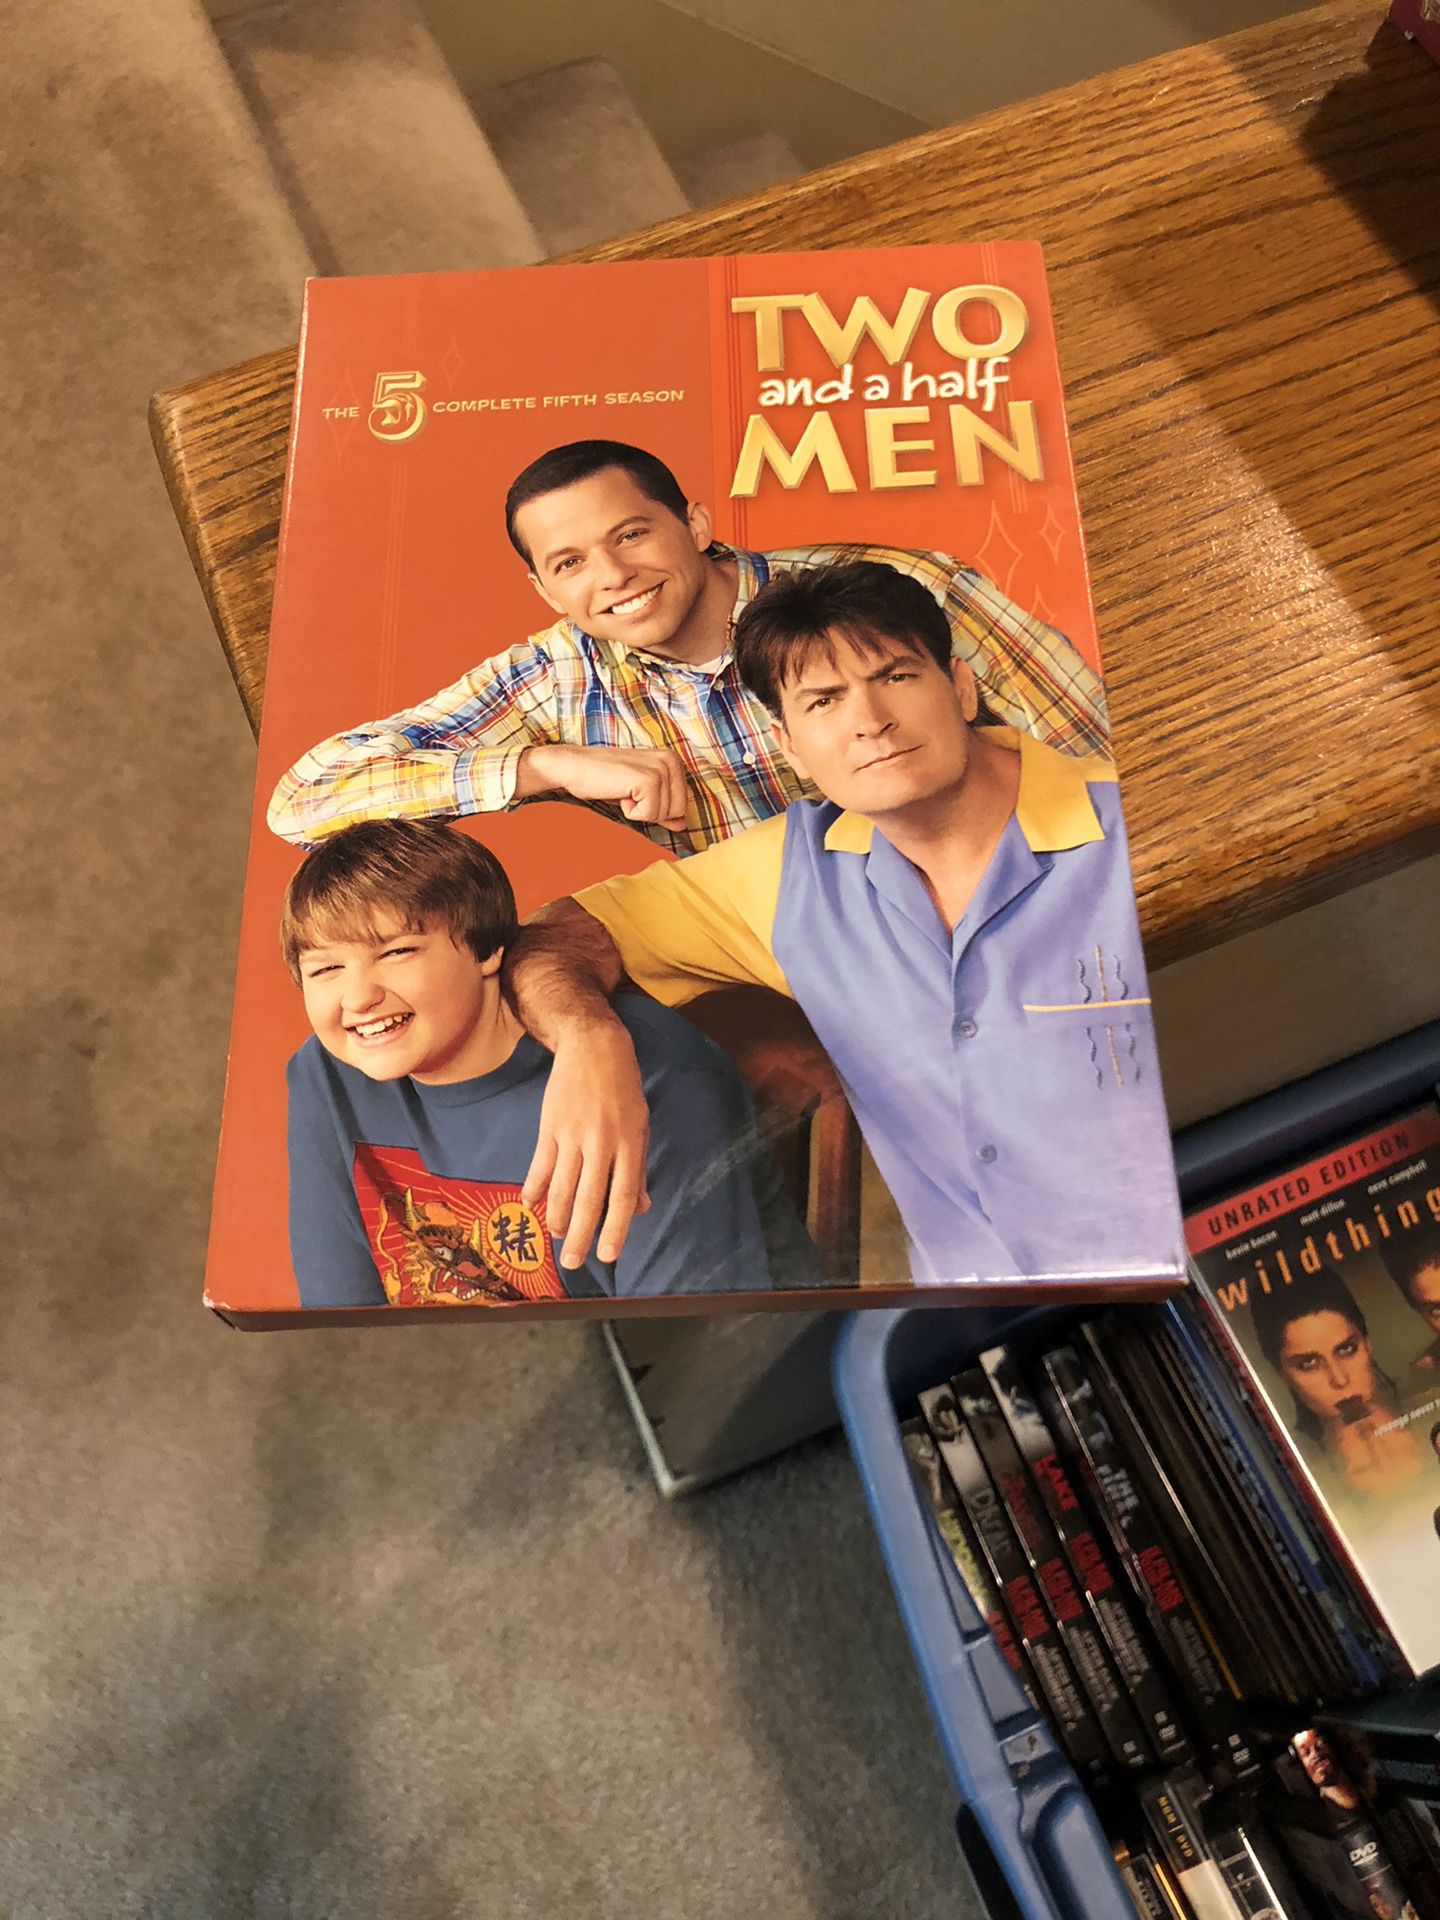 Two And A Half Men The Complete Fifth Season DVD S5 five 5 Box Set Charlie Sheen